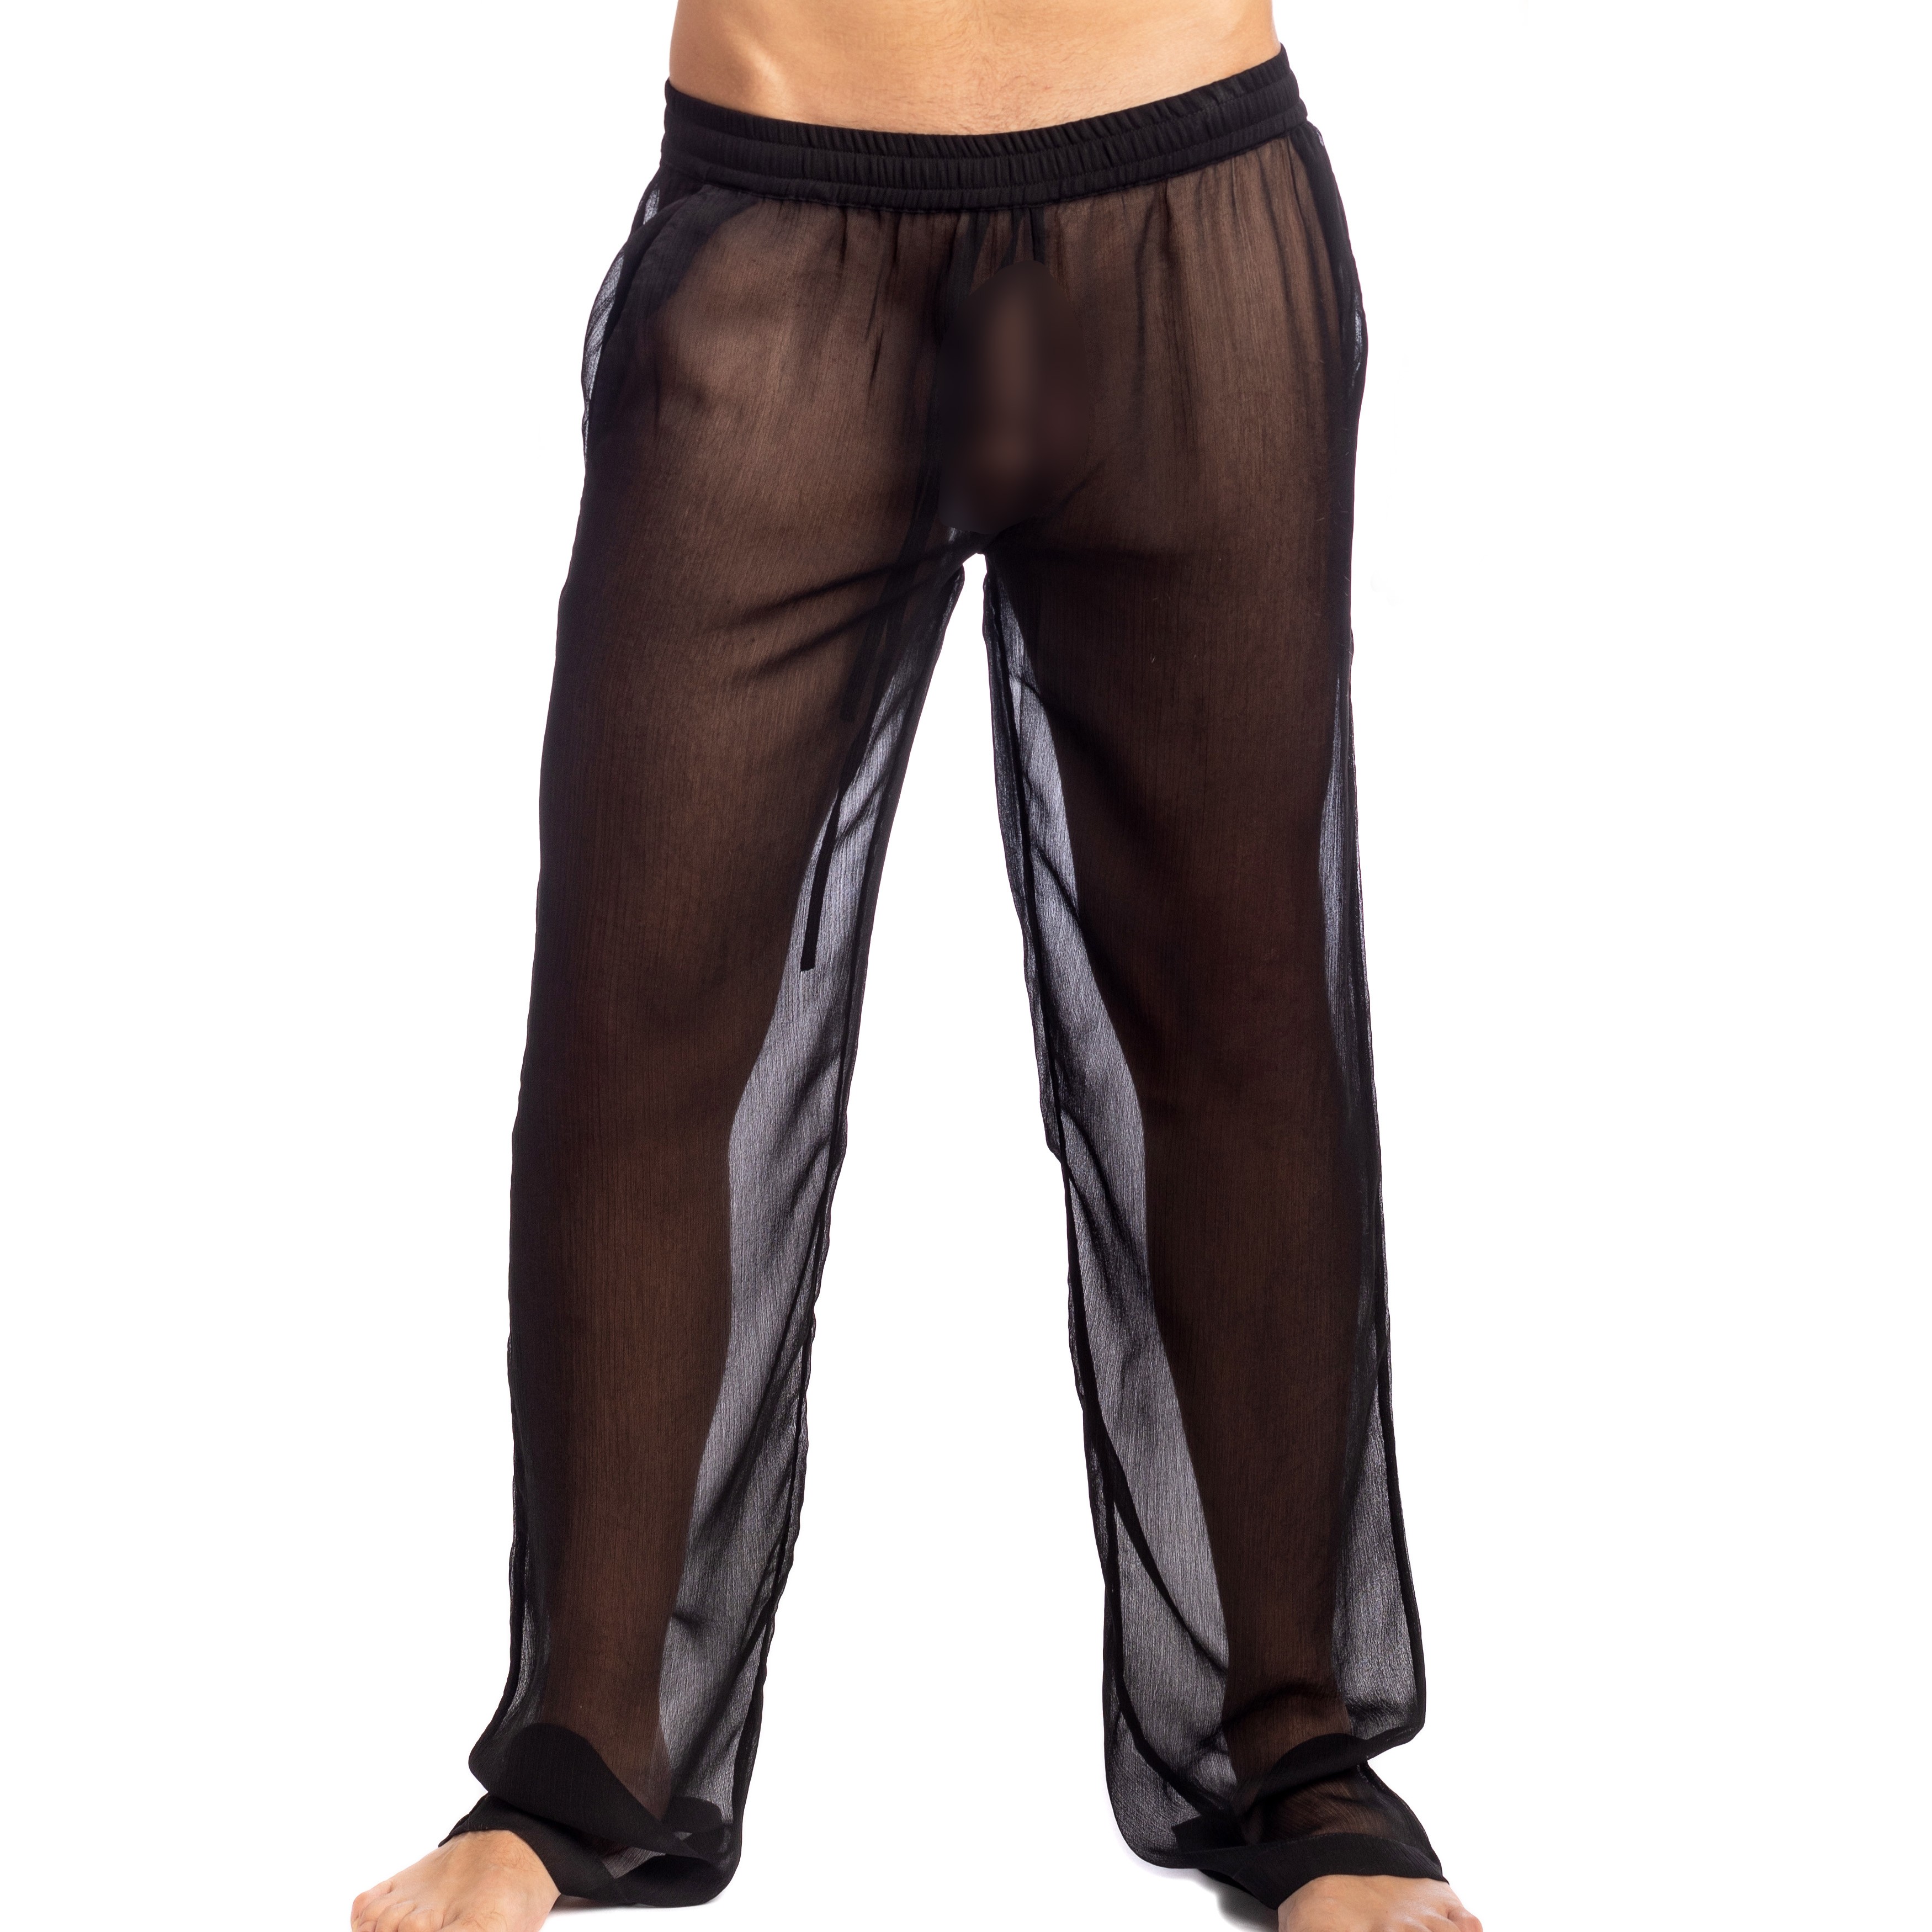 Chantilly - Sheer Pants - L'Homme Invisible : sale of Pants for men